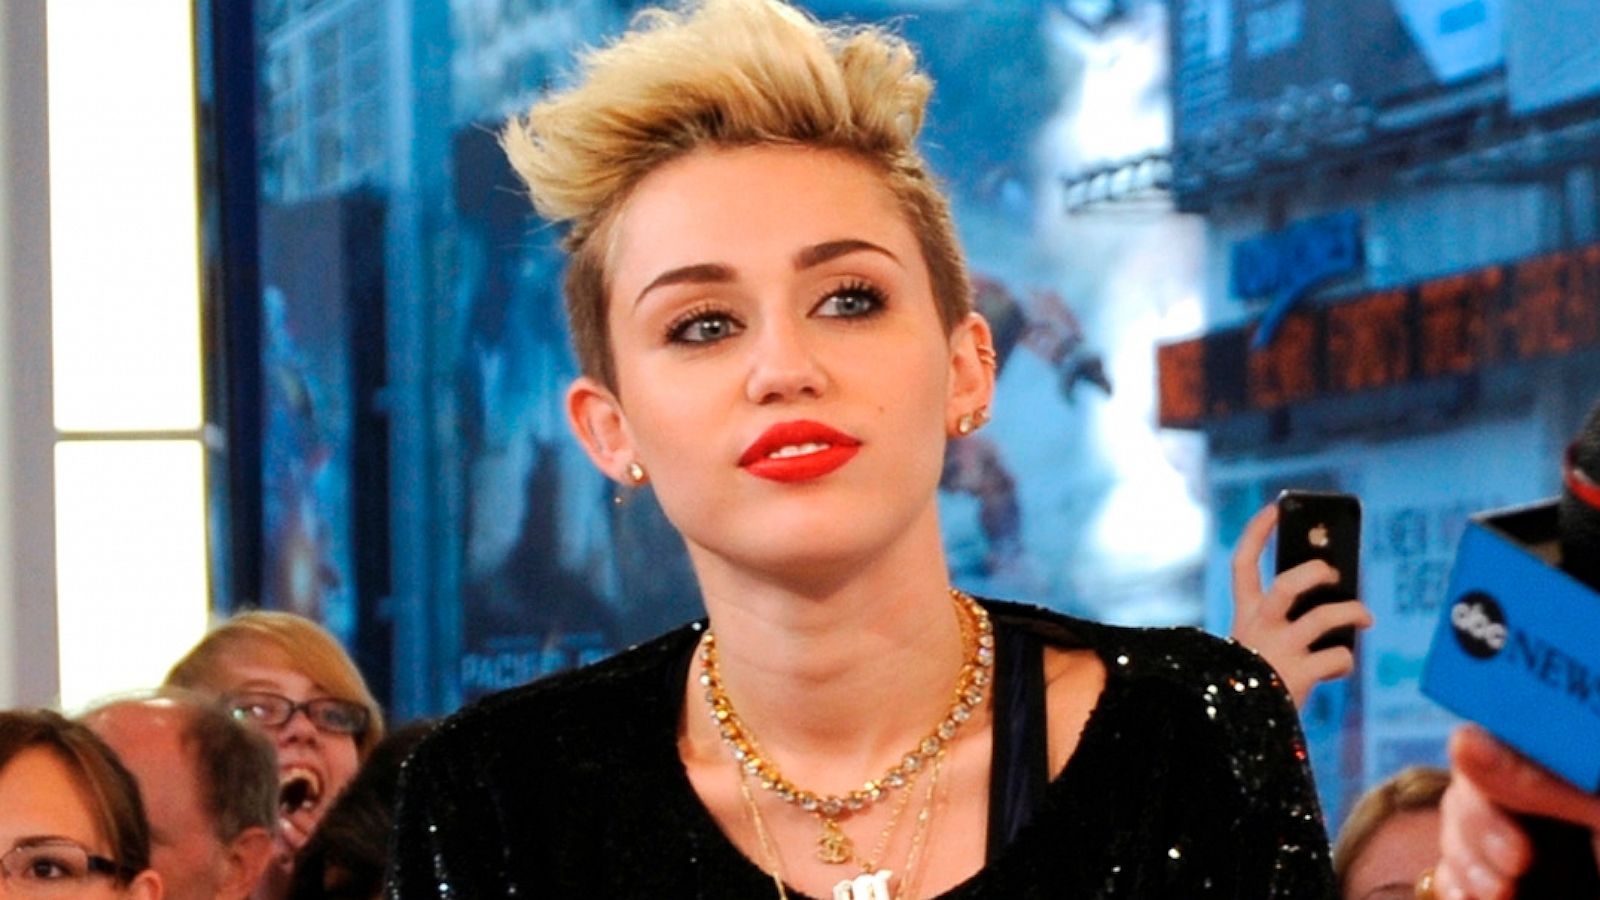 Miley Cyrus Is Over Her Short Hair: Which Look Should She Choose Next? -  ABC News